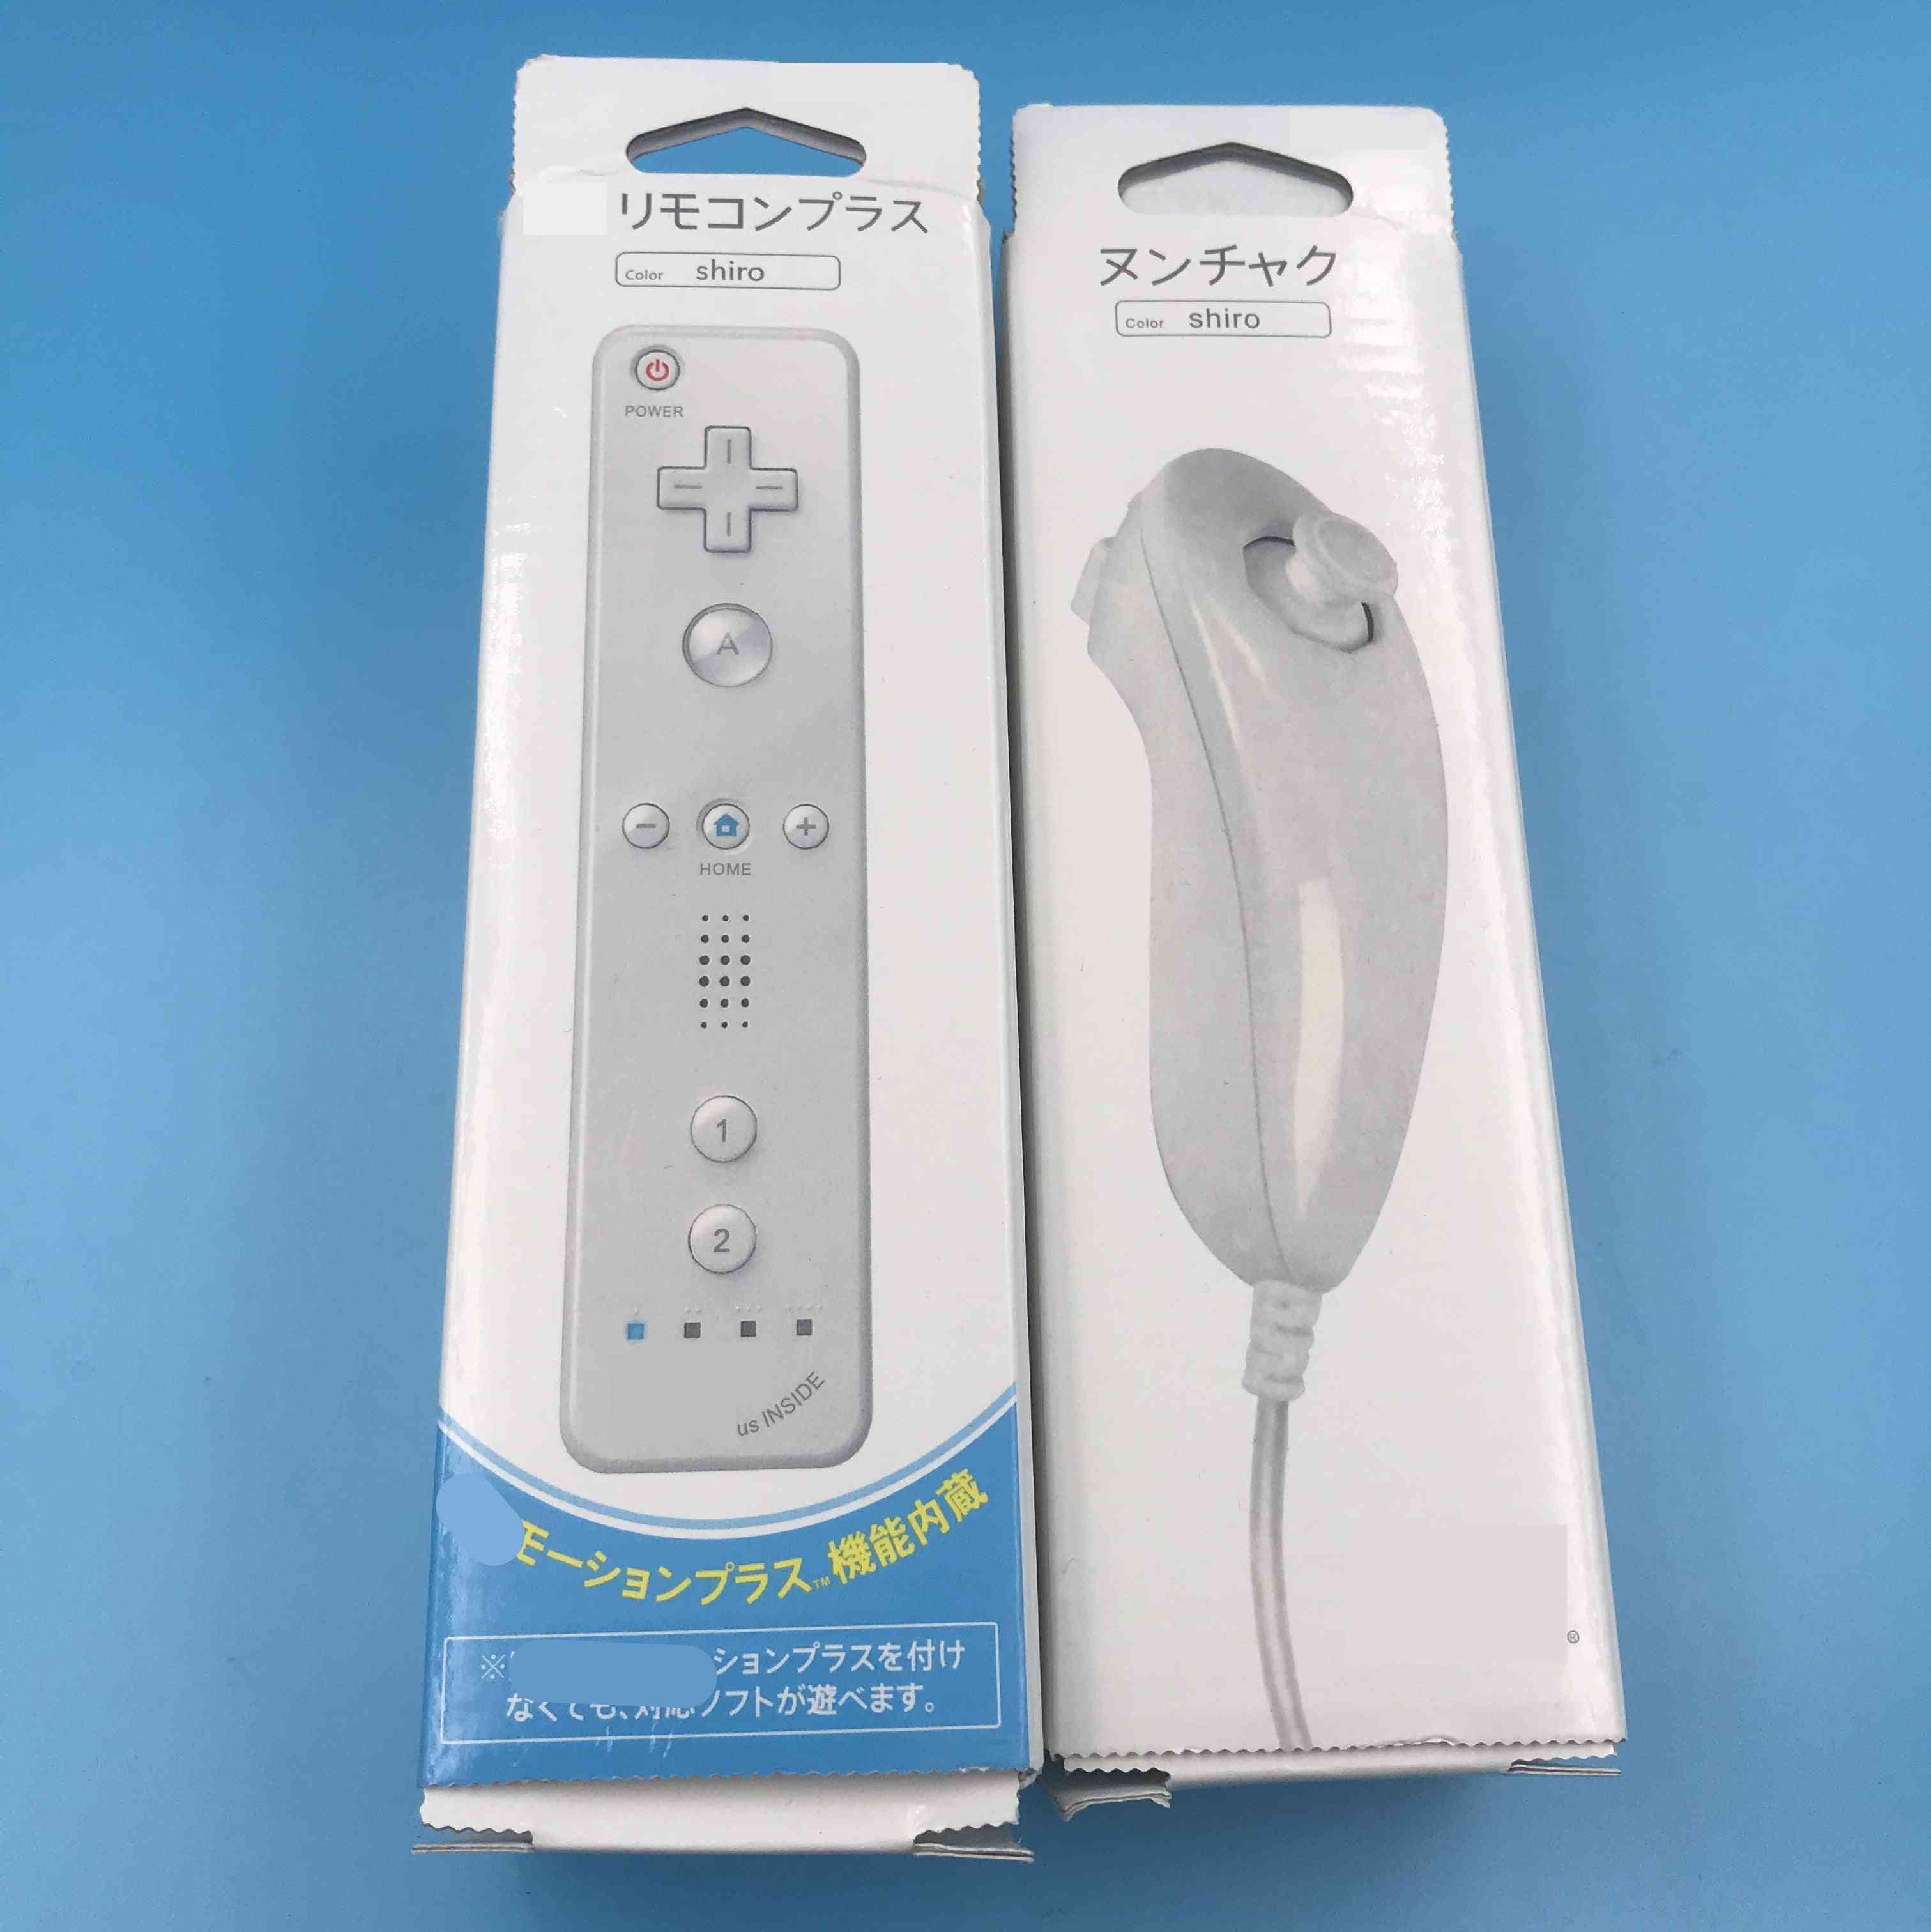 Wireless Remote Controller, Wii Built In Motion Plus + Nunchuk Gamepad + Silicone Case, Game Console